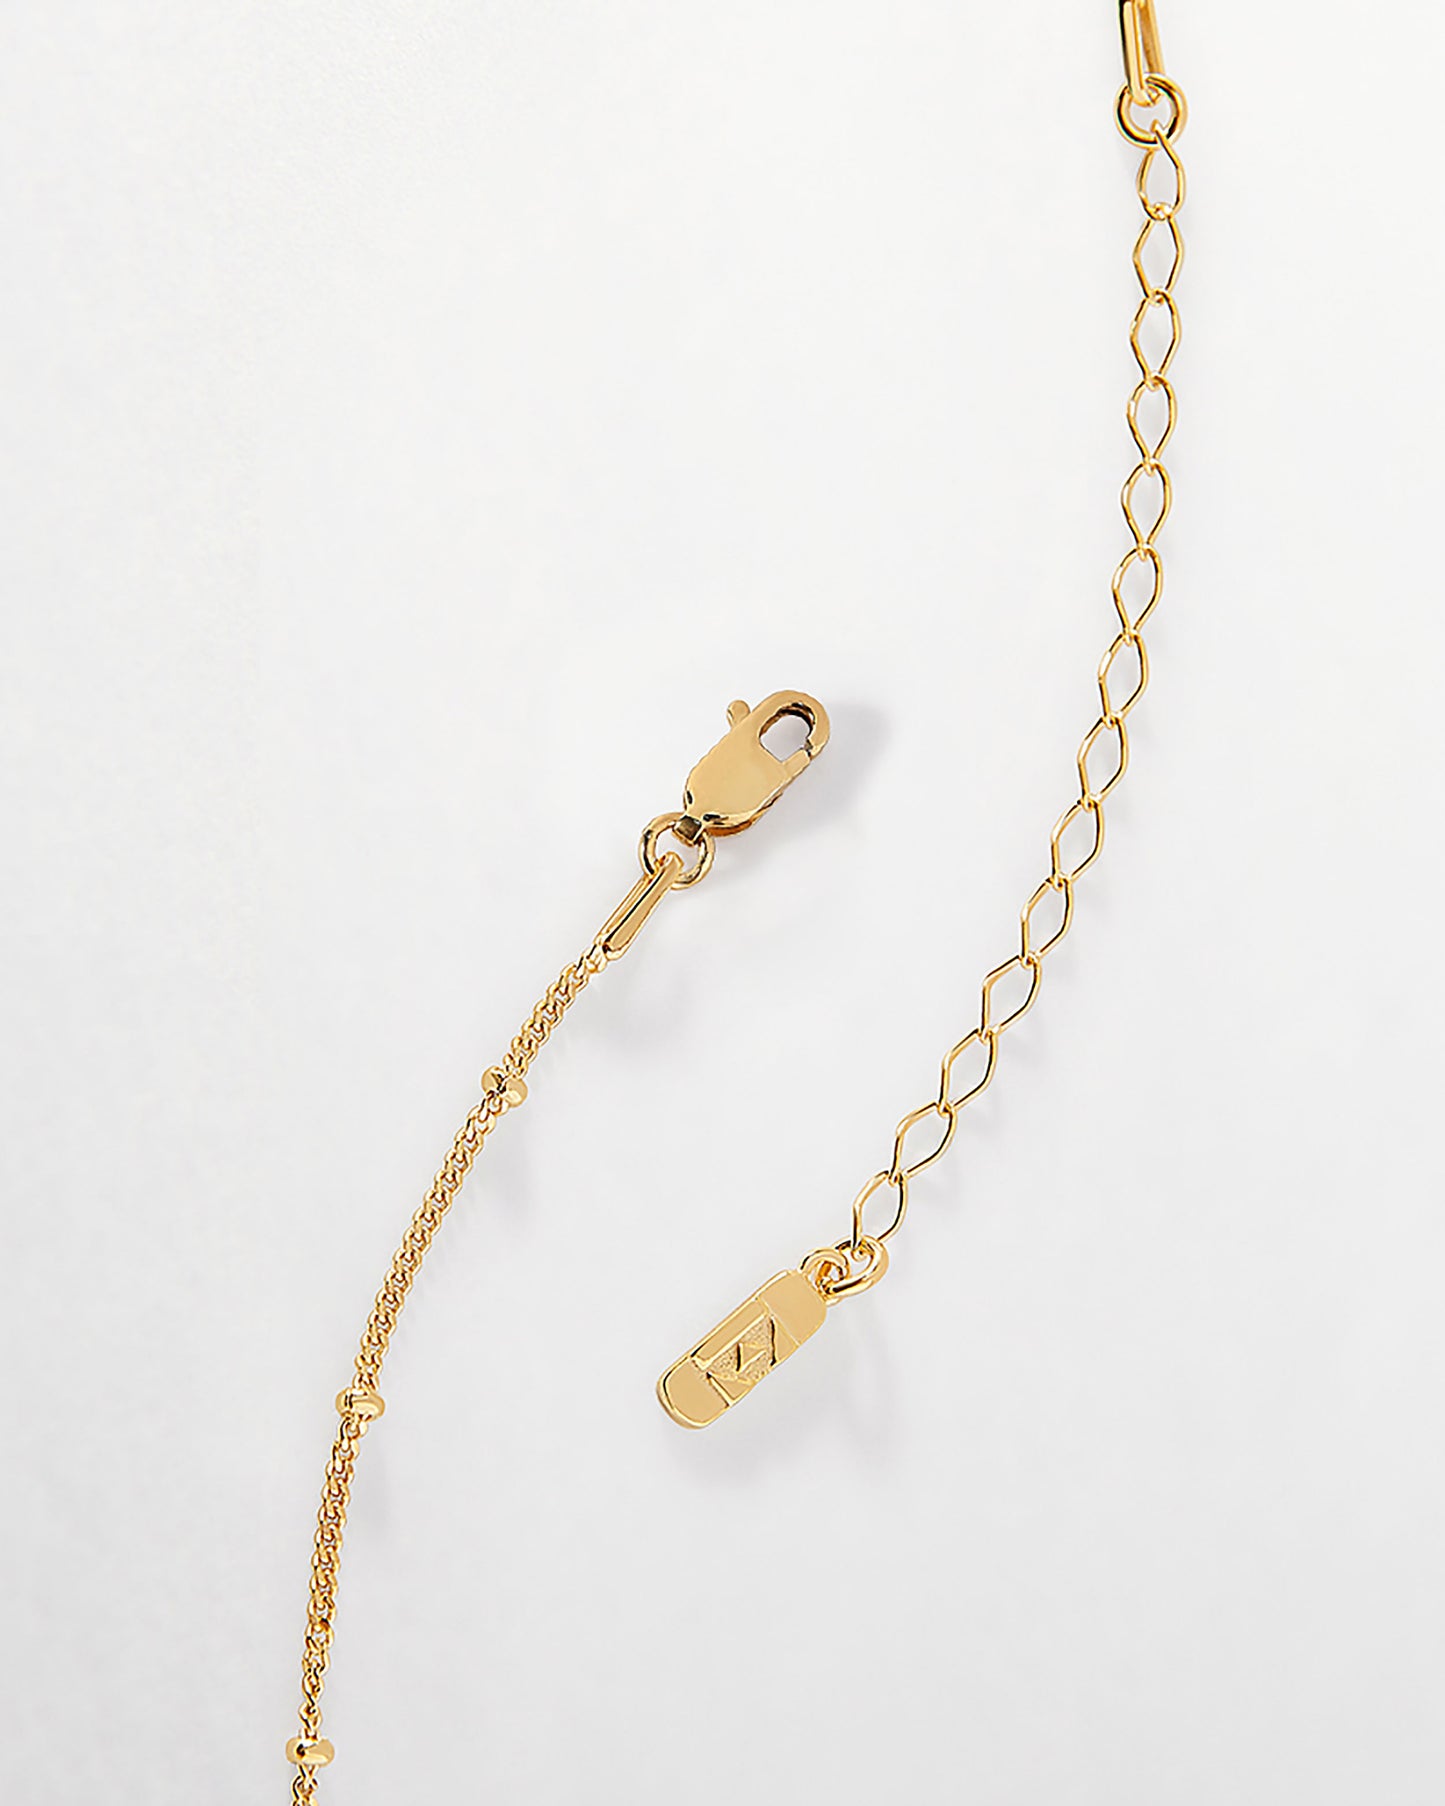 Initial & Birthstone Necklace - Gold